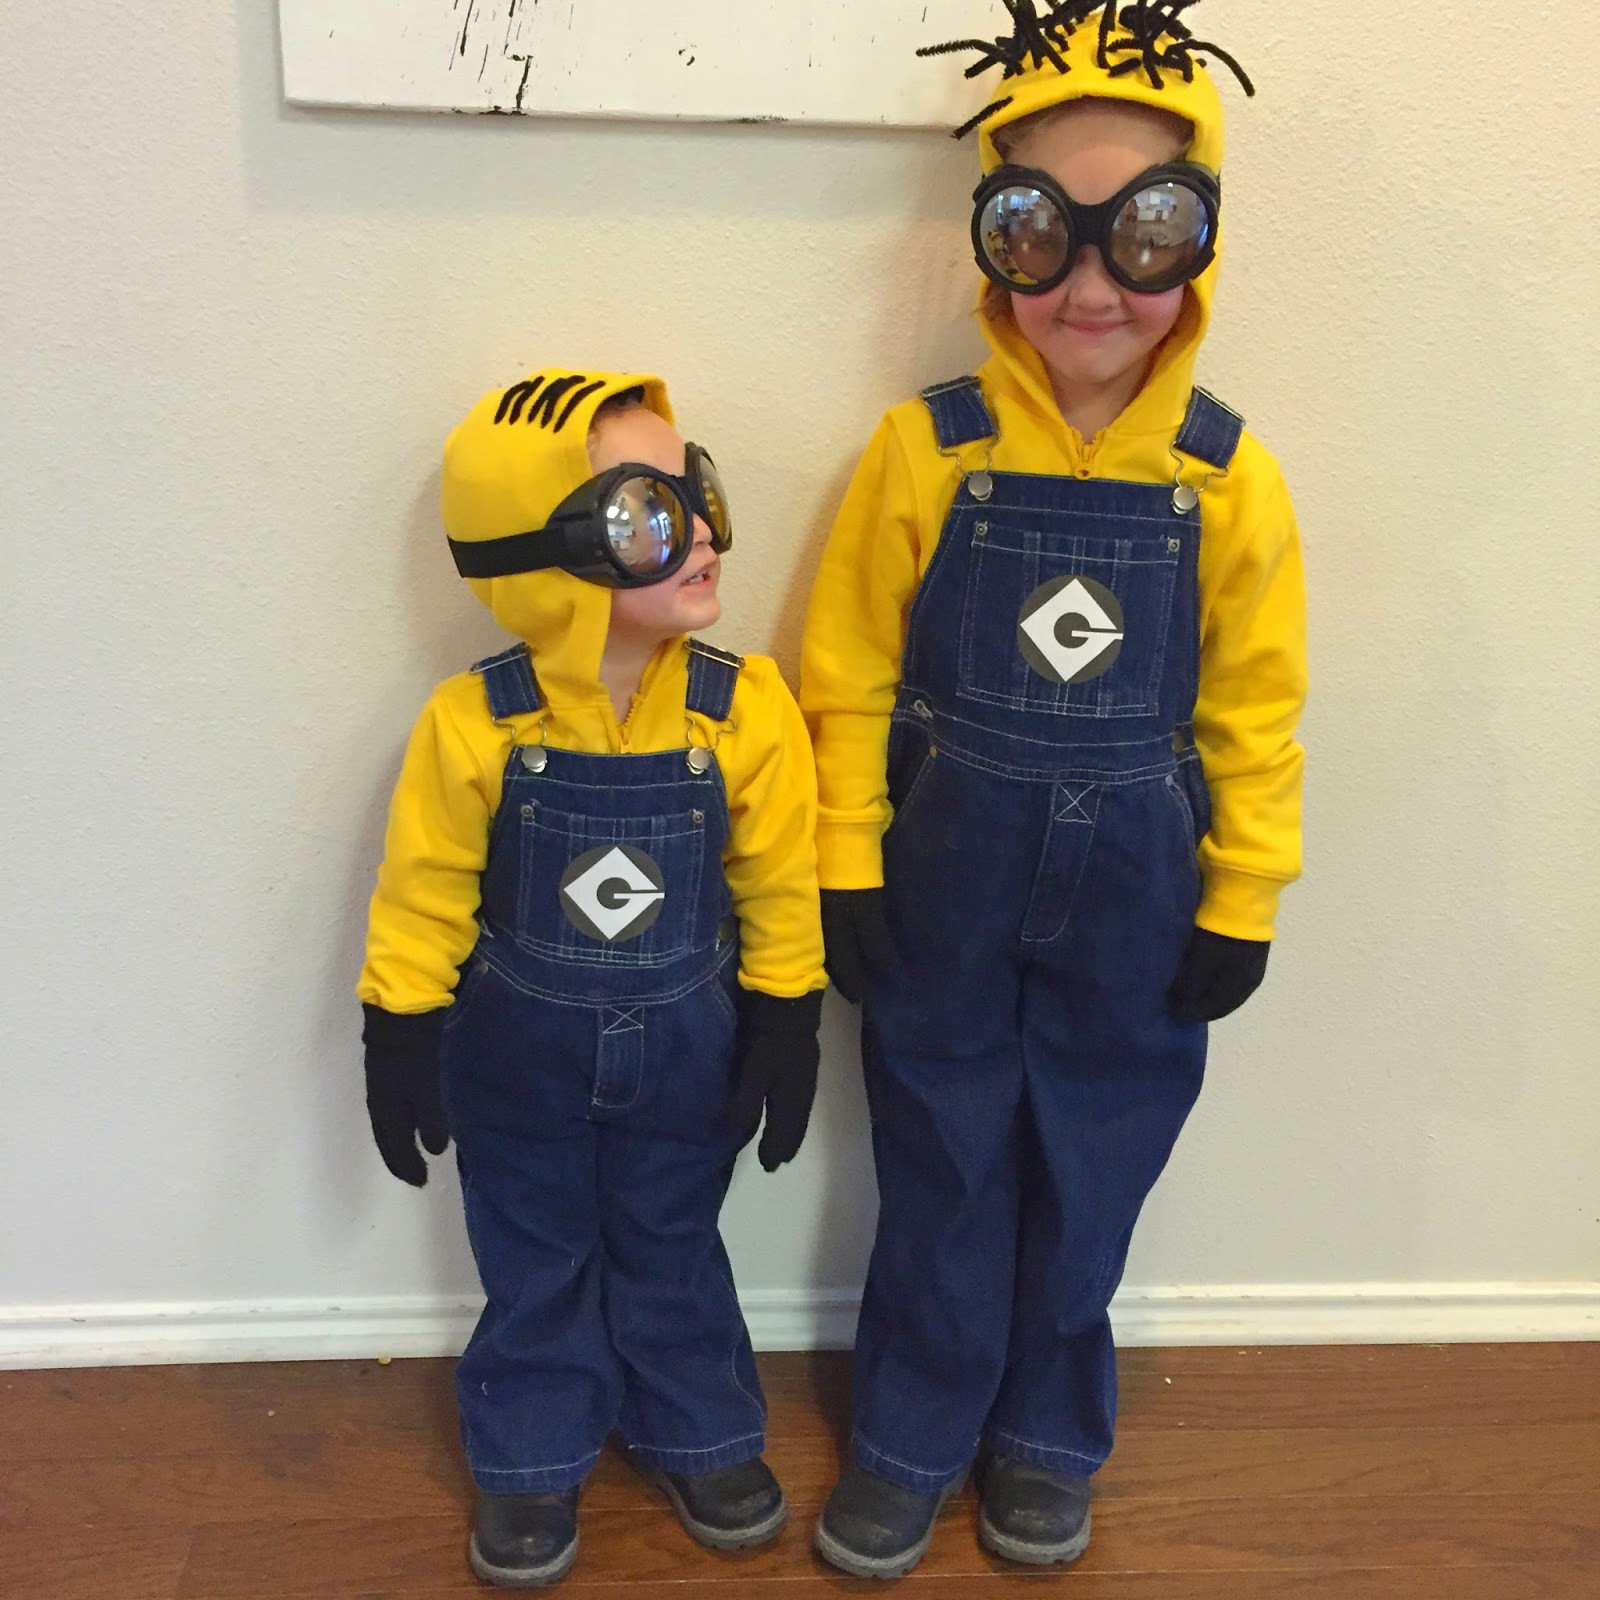 DIY Minion Costume Without Overalls
 Fab Everyday